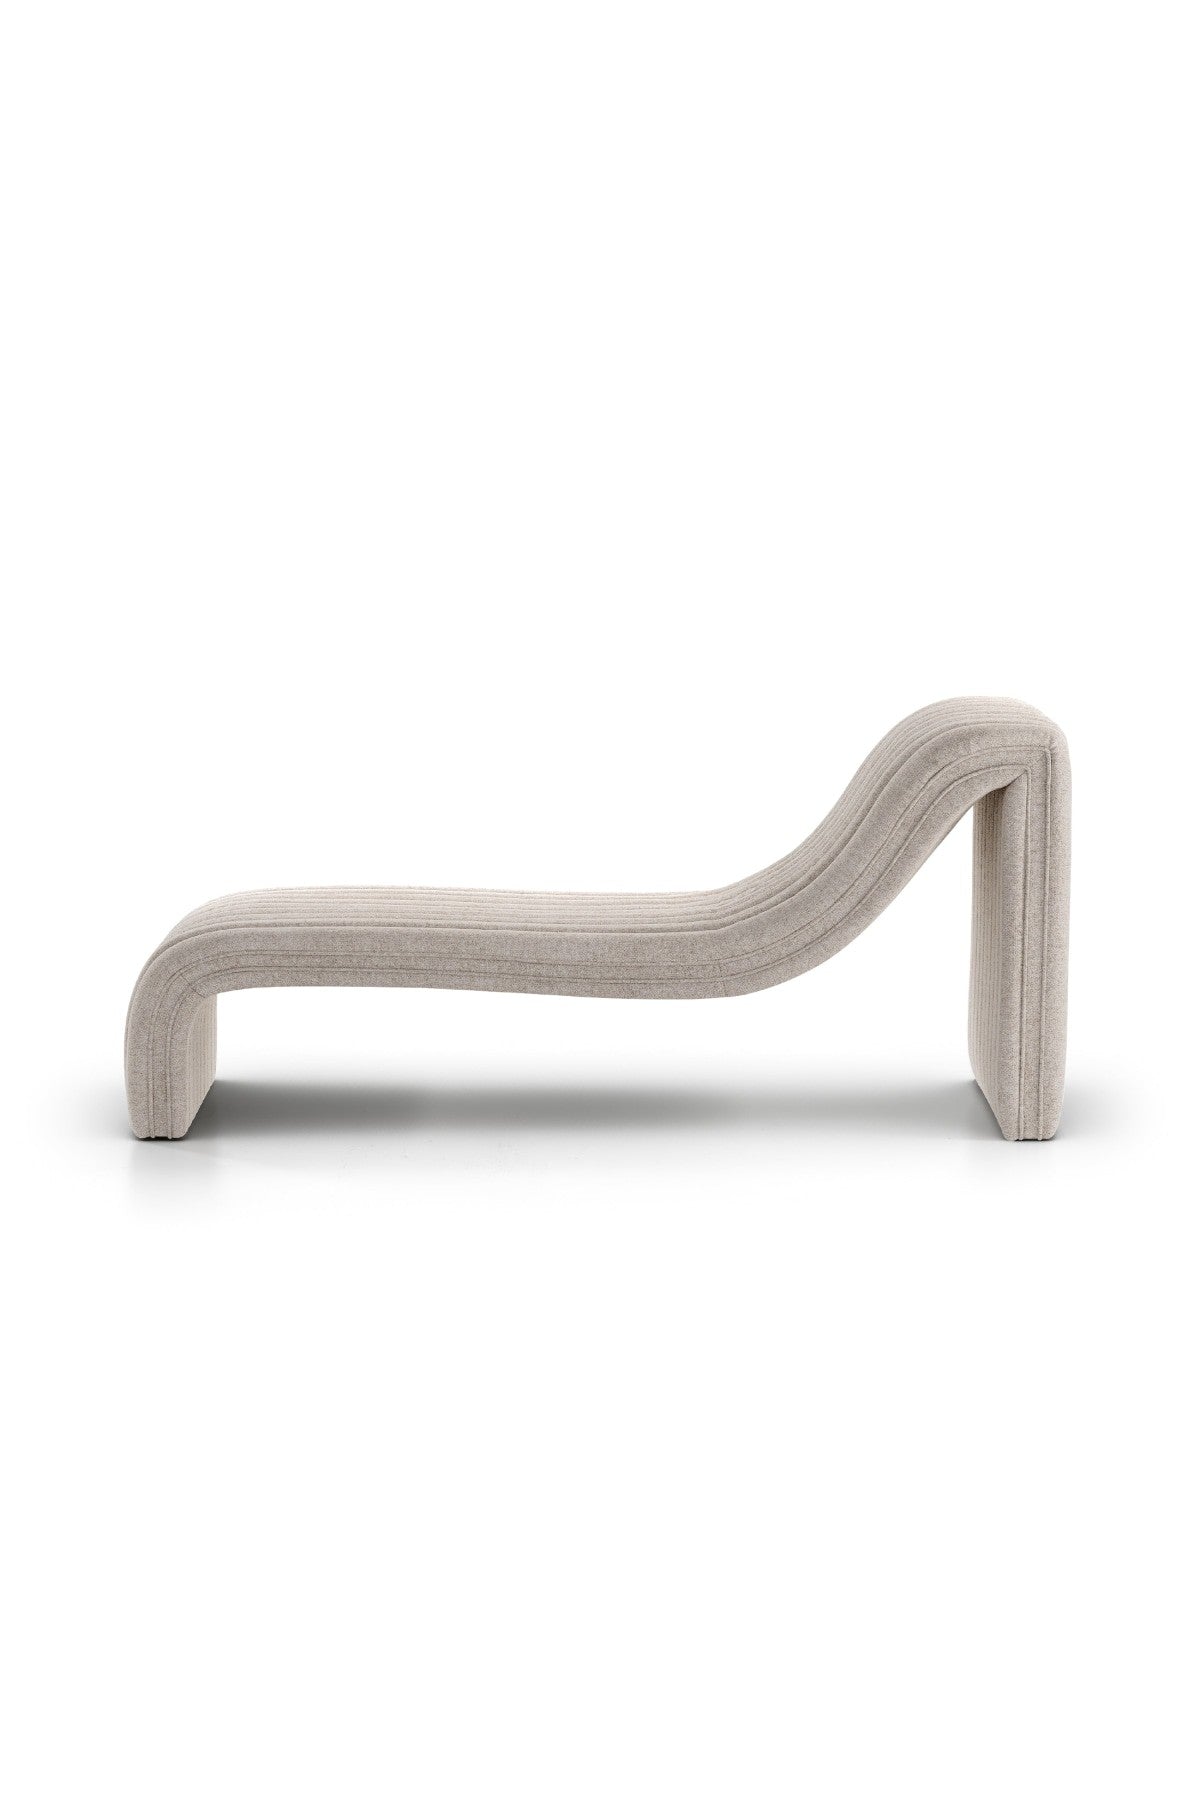 Dove Chaise Lounge - Orly Natural